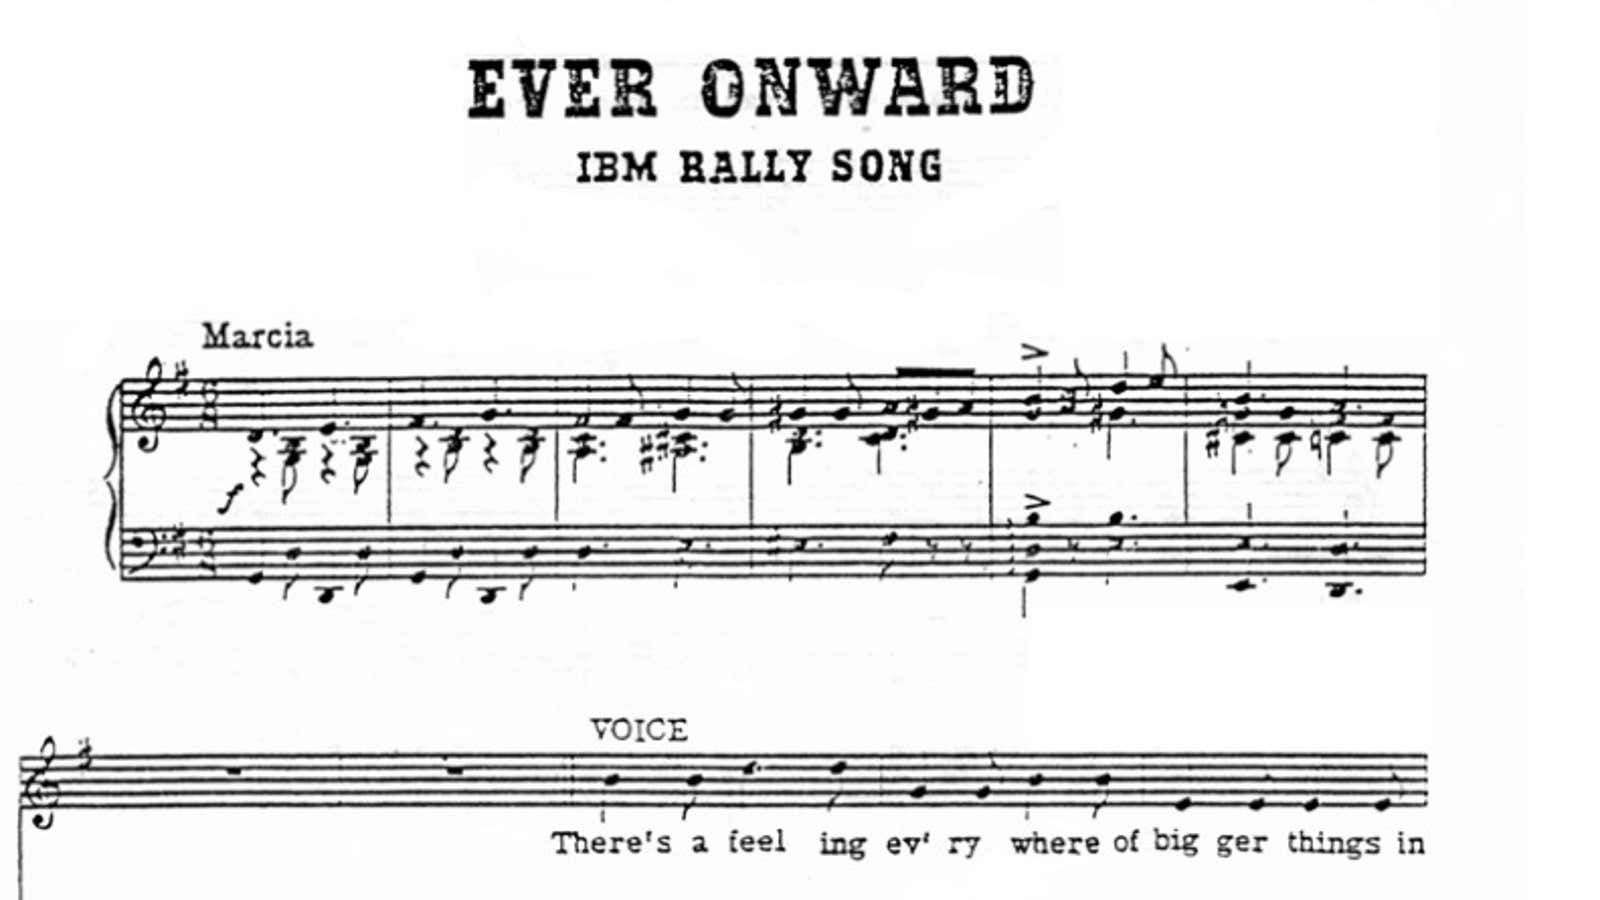 From the IBM Songbook.